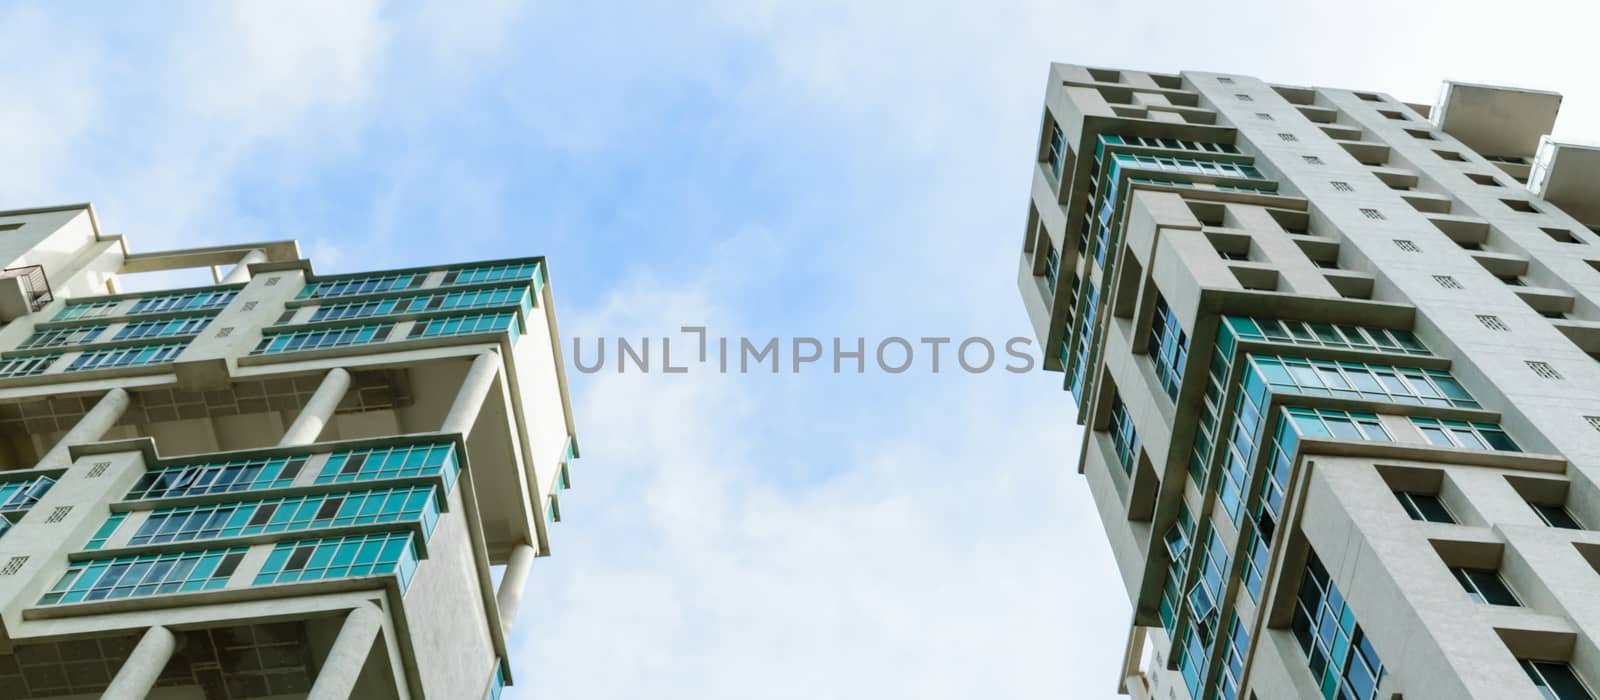 Low angle view of Modern skyscrapers Buildings in Kolkata City. Sunlight reflection, blue sky and white Fluffy clouds during sunset. Directly below view. Slanted, Tilt, diminishing perspective, Copy space room for text.